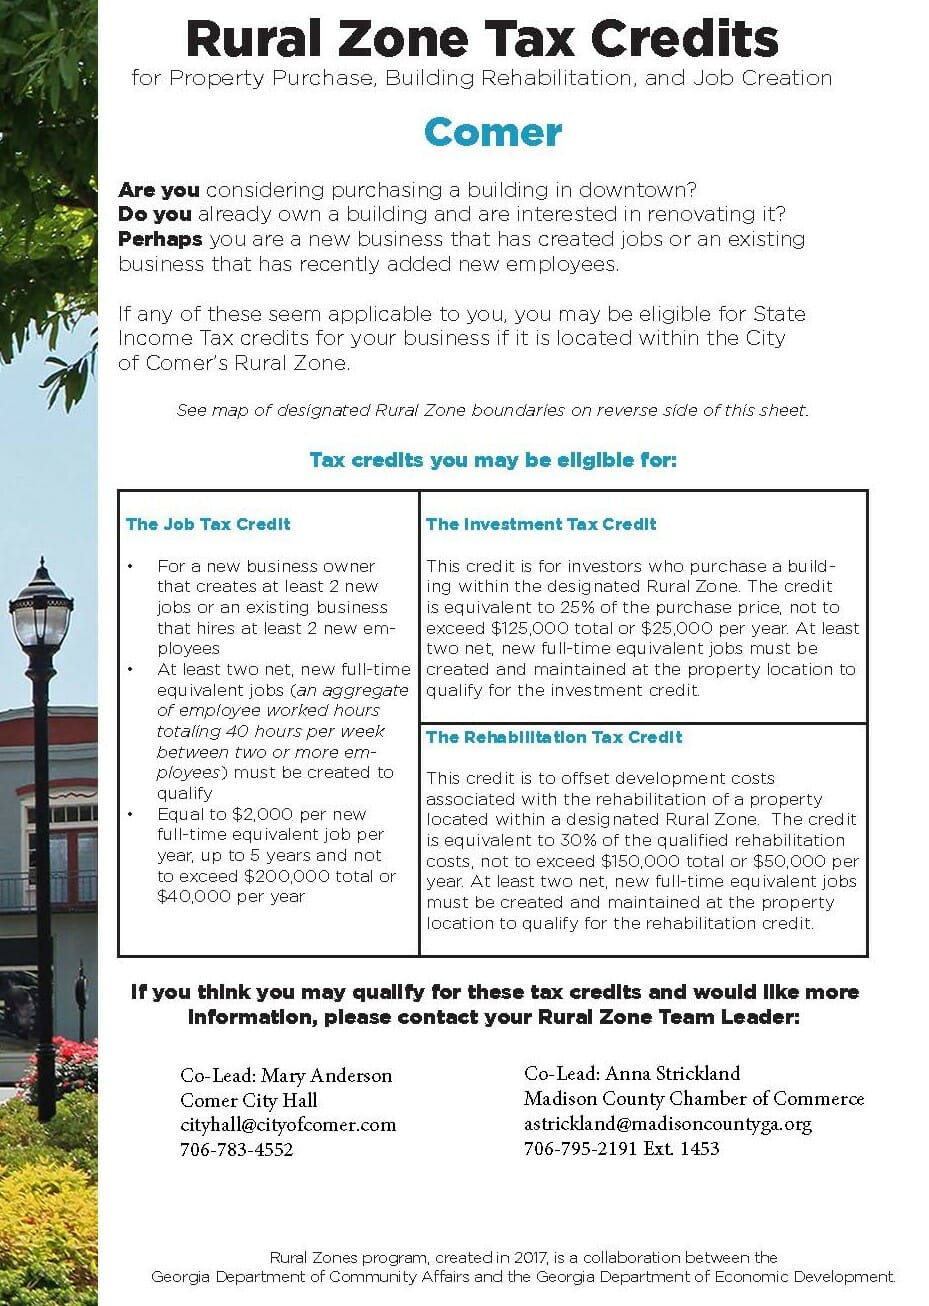 Comer Rural Zone Flyer (1)_Page_2new